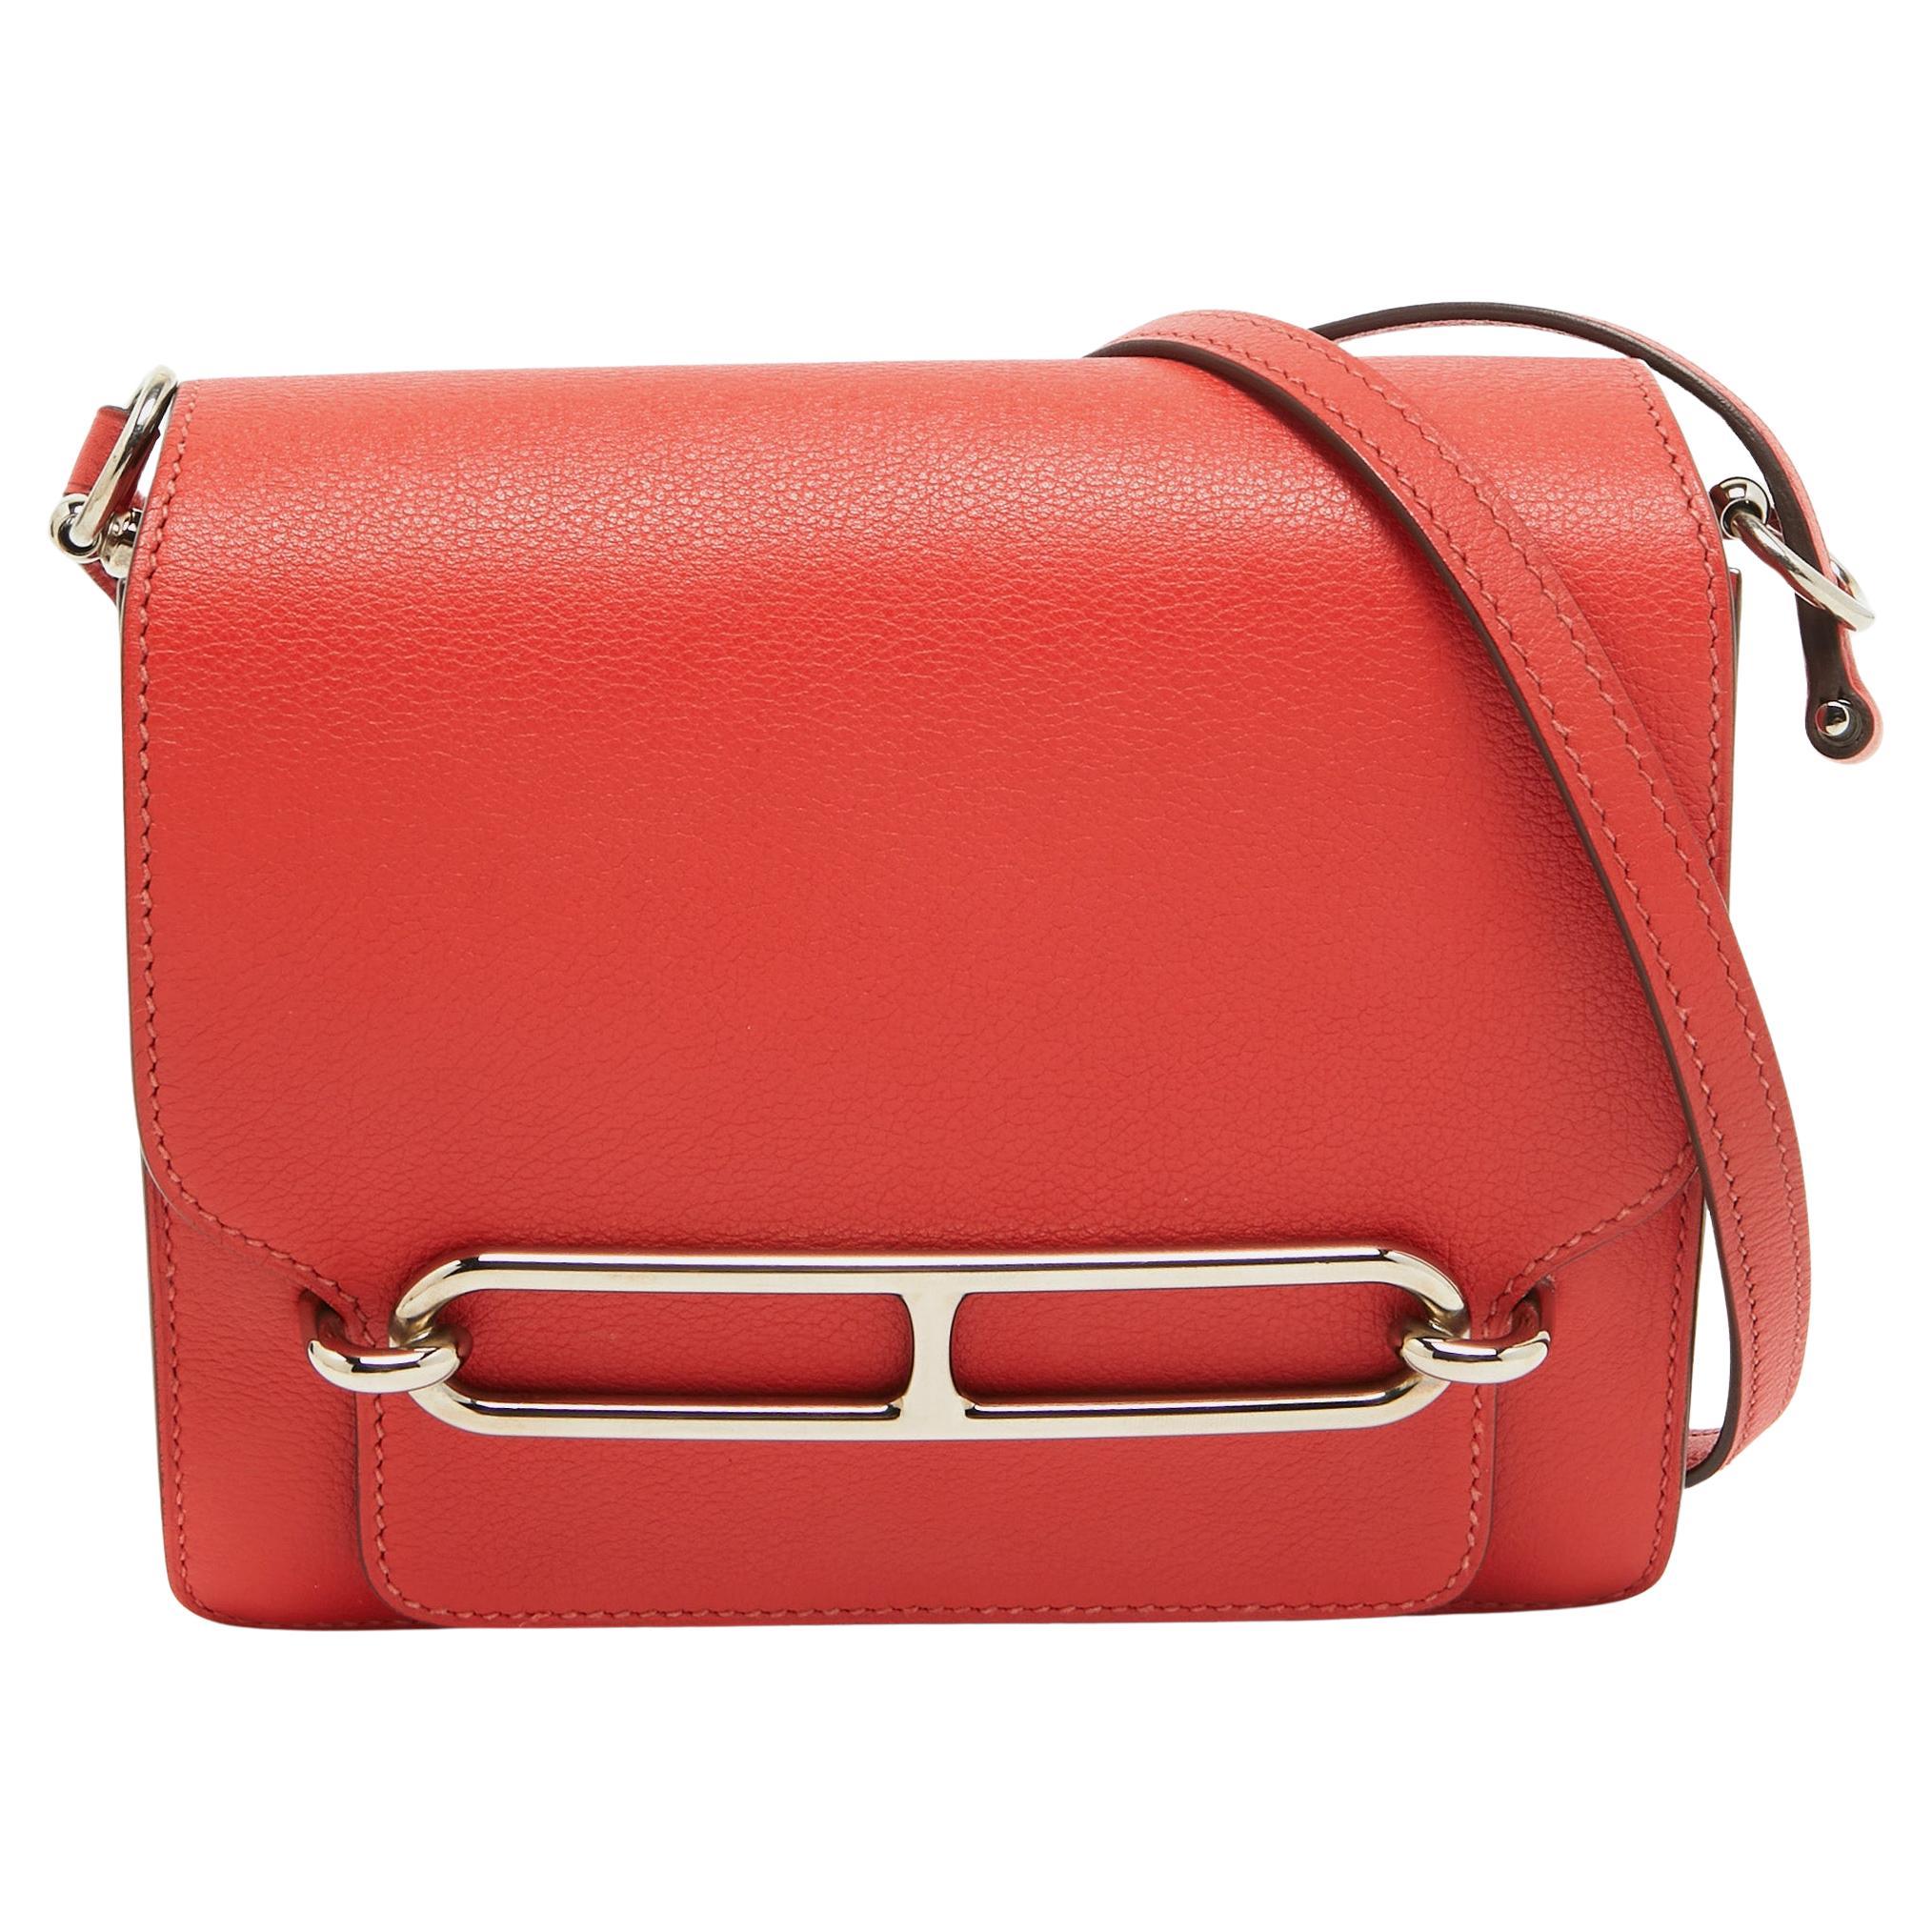 Hermes Rouge Tomate Evercolor Leather Roulis Mini Bag